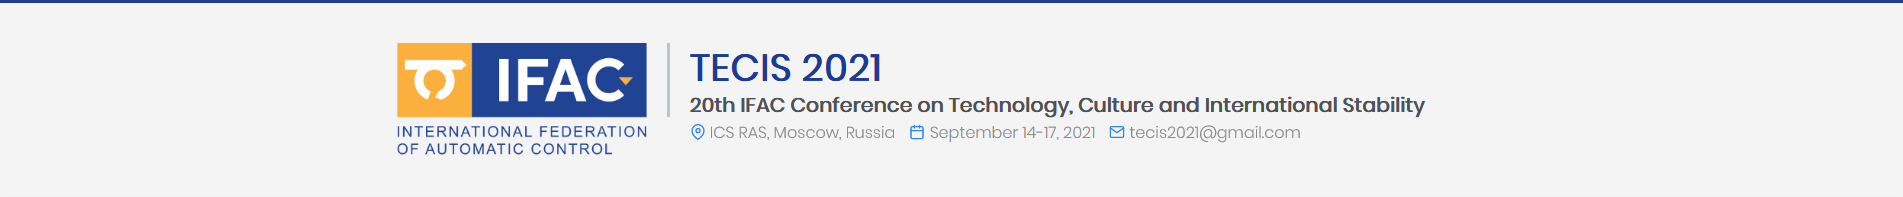 Technology, Culture and International Stability - 20th TECIS 2021™